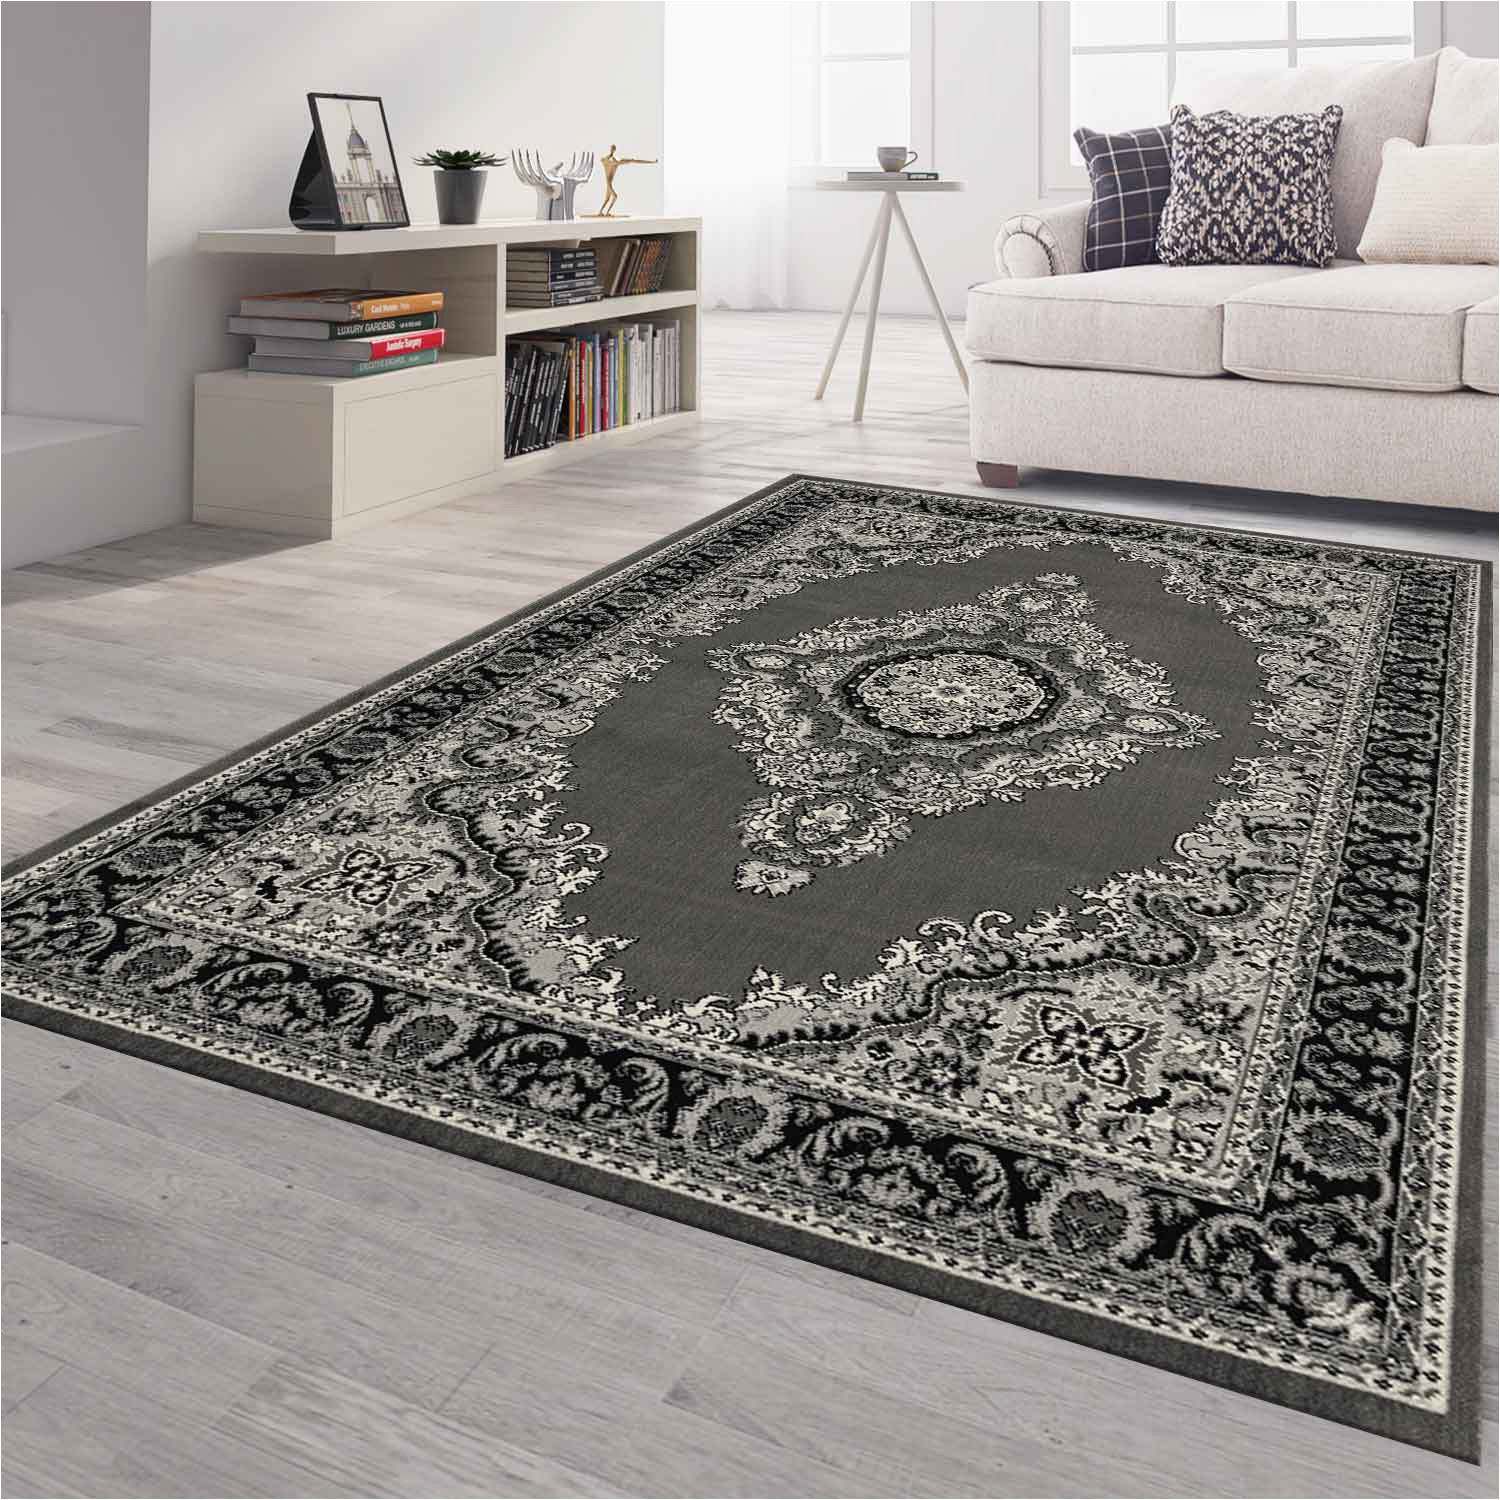 Traditional area Rugs for Living Room Bundle] orient Flower Pattern Rug Living Room Red Beige Colour …